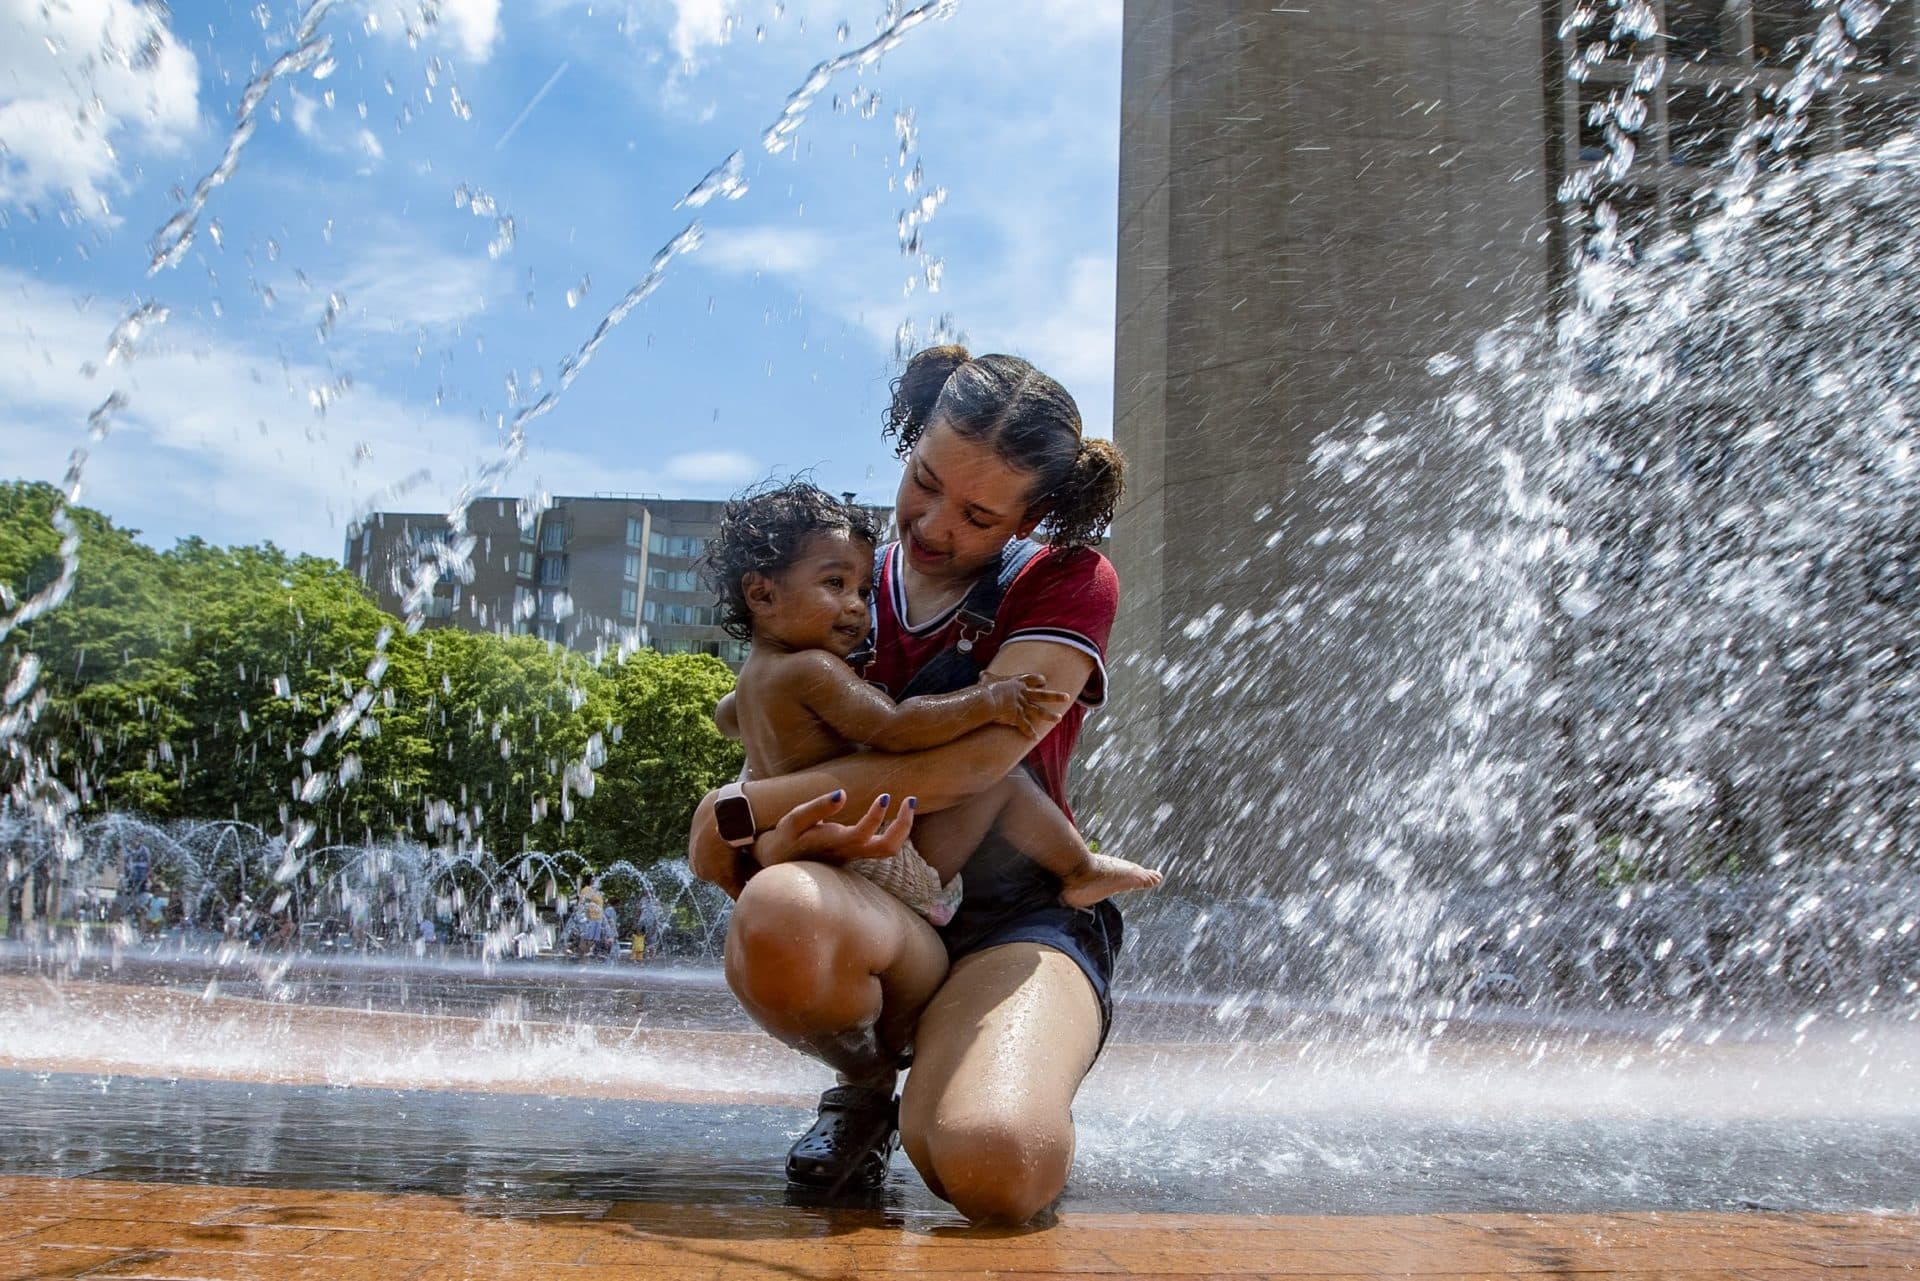 Adiana Hollis, 14, holds 14-month-old Julian Mel in her arms while they cool off in the fountain at the Christian Science Plaza. (Jesse Costa/WBUR)